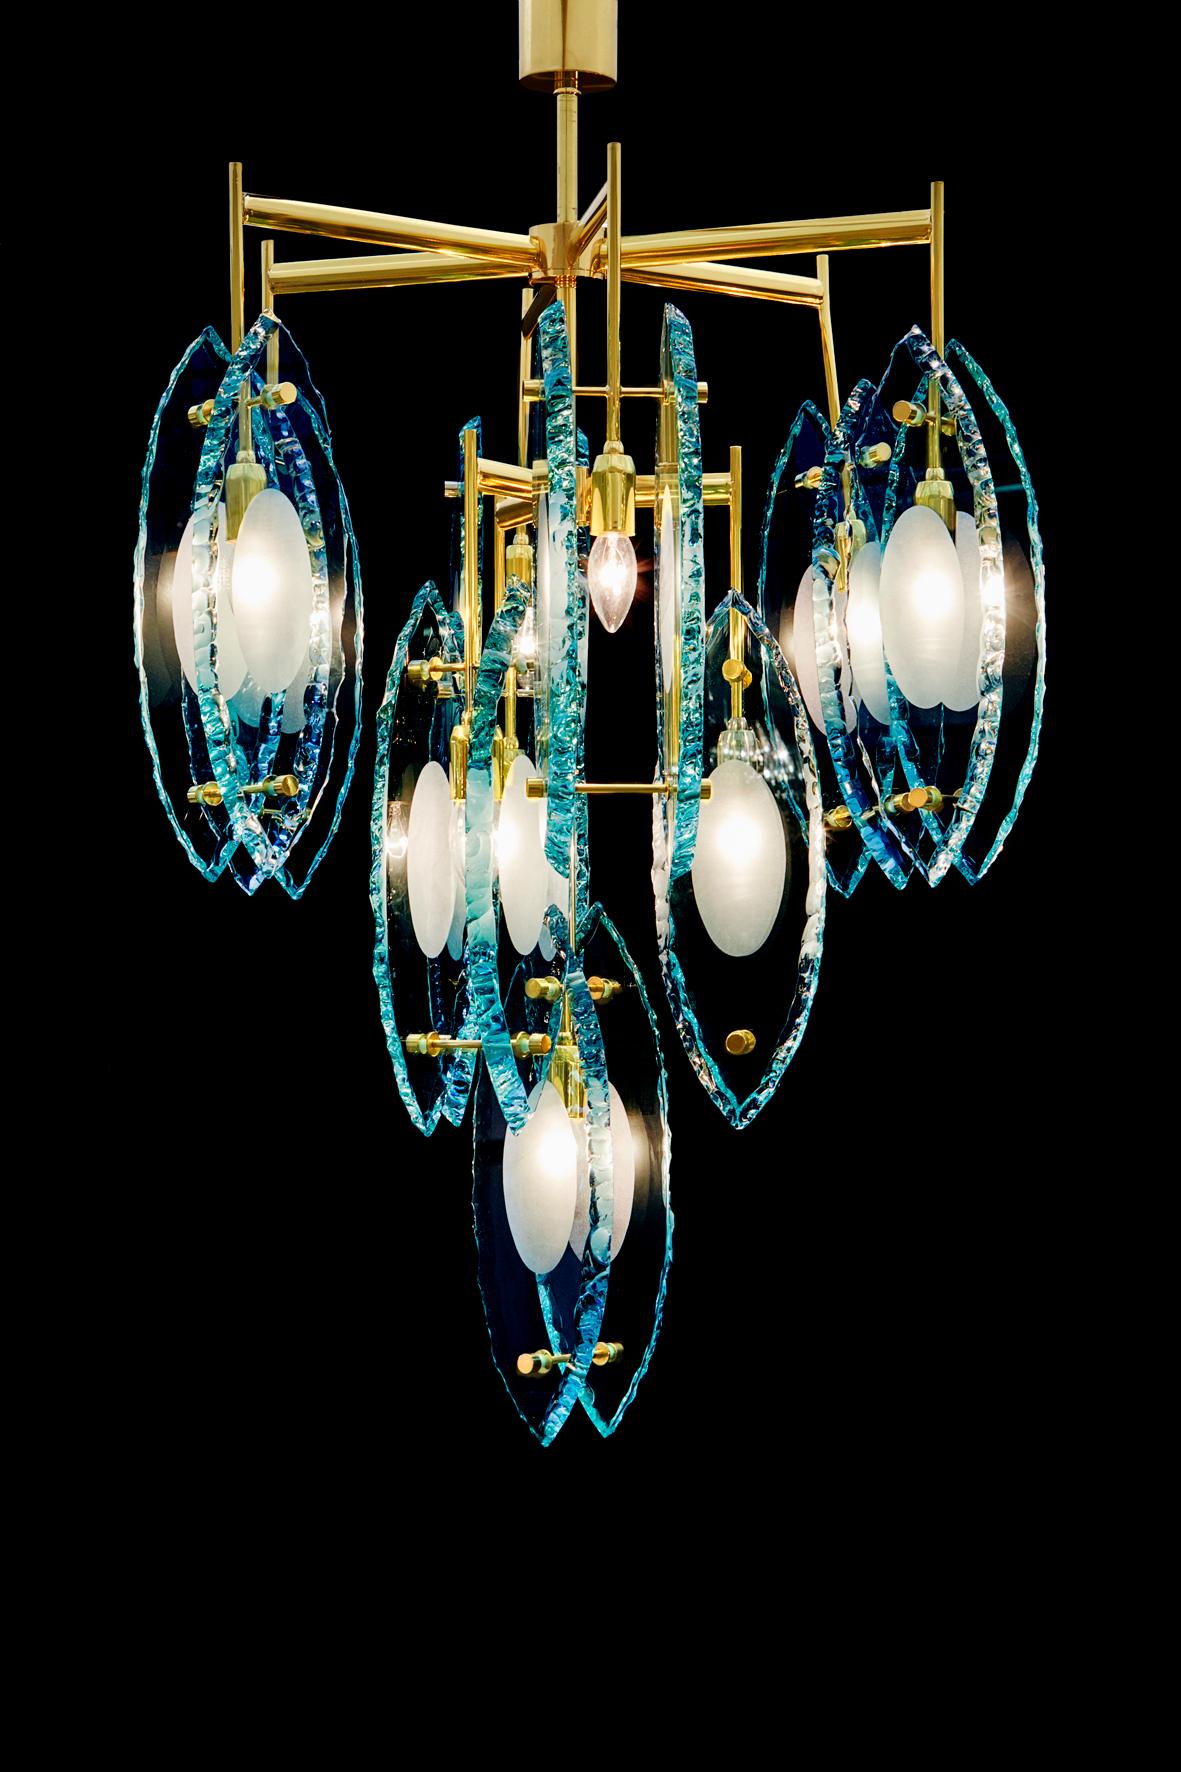 Limited edition Italian chandelier with thick etched glasses, mounted on polished brass frame / Exclusively designed by Gianluca Fontana for Fabio Ltd / Made in Italy
10 lights / E12 or E14 type / max 40W each
Diameter: 28 inches / Height: 44